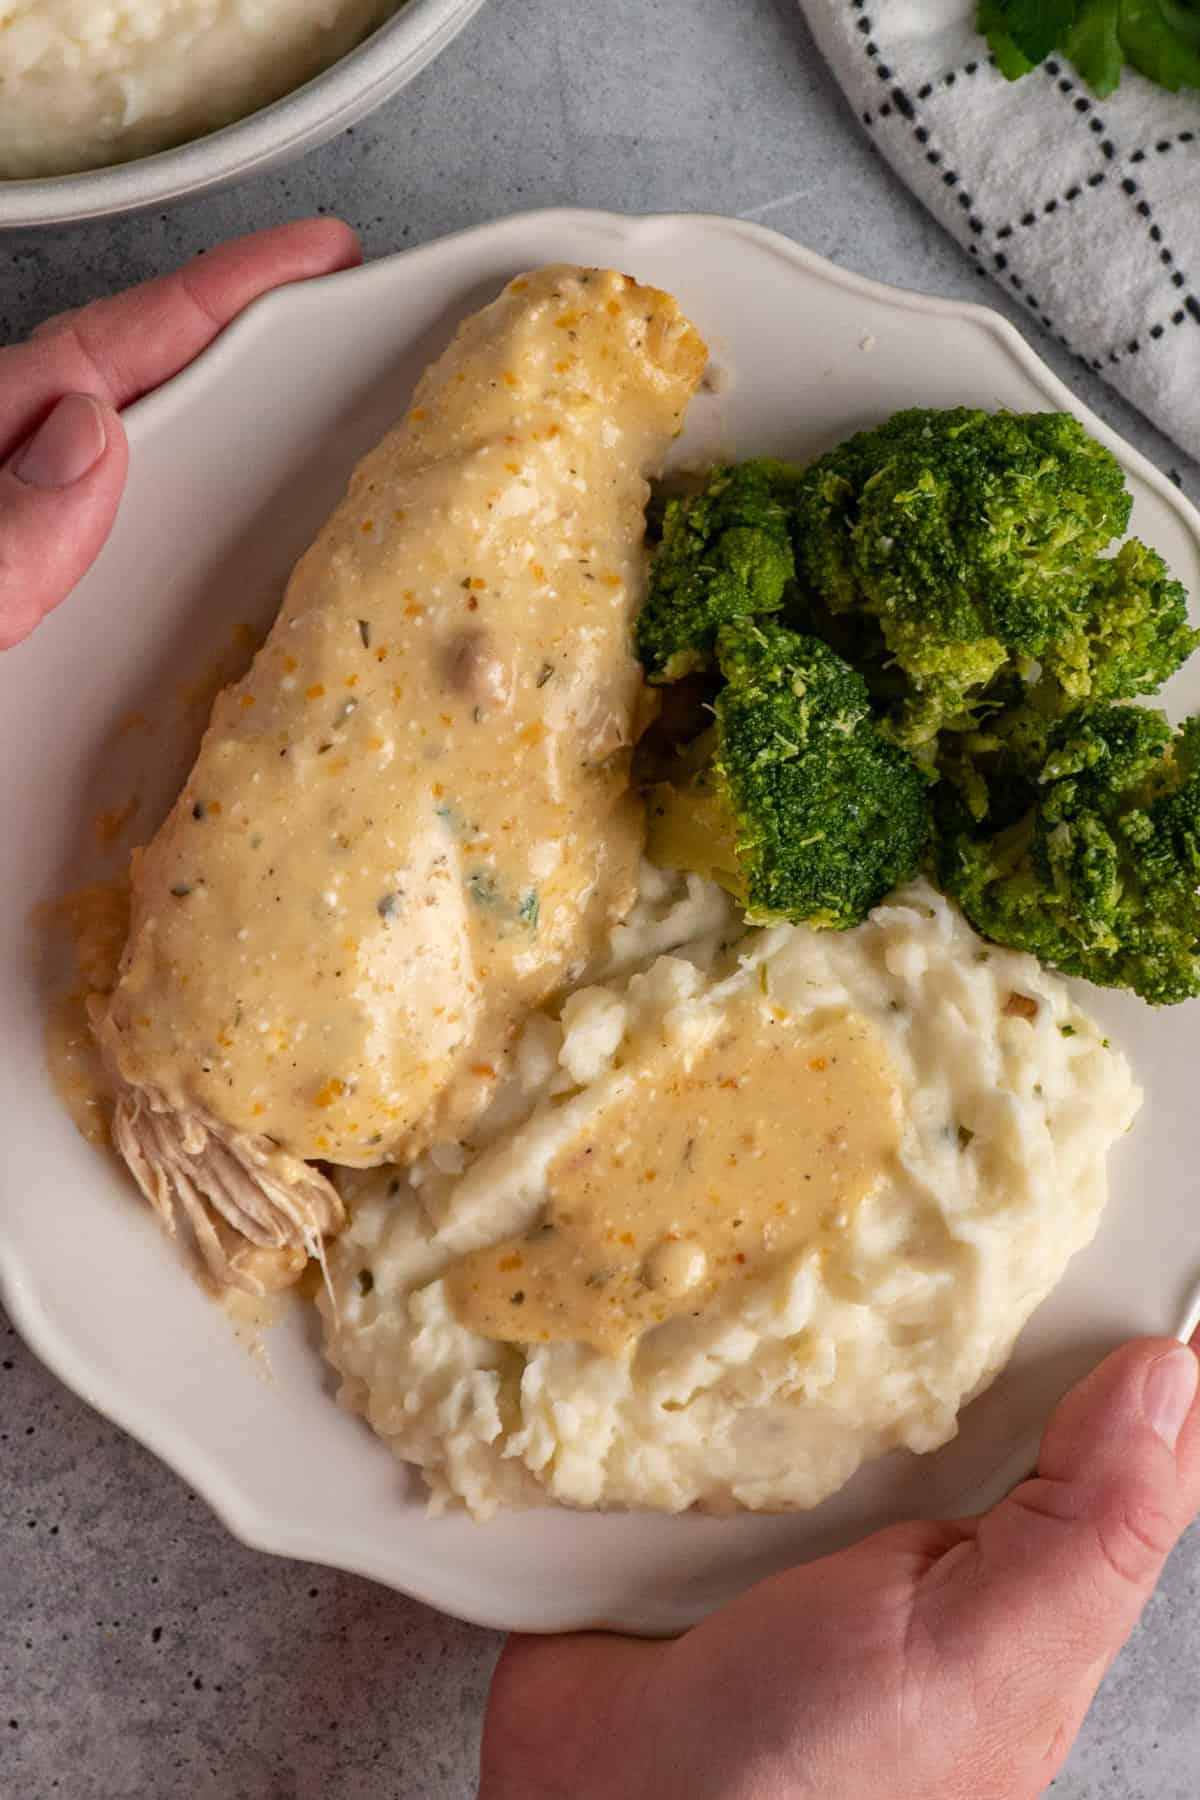 Hands holding a plate of crock pot ranch chicken and mashed potatoes.